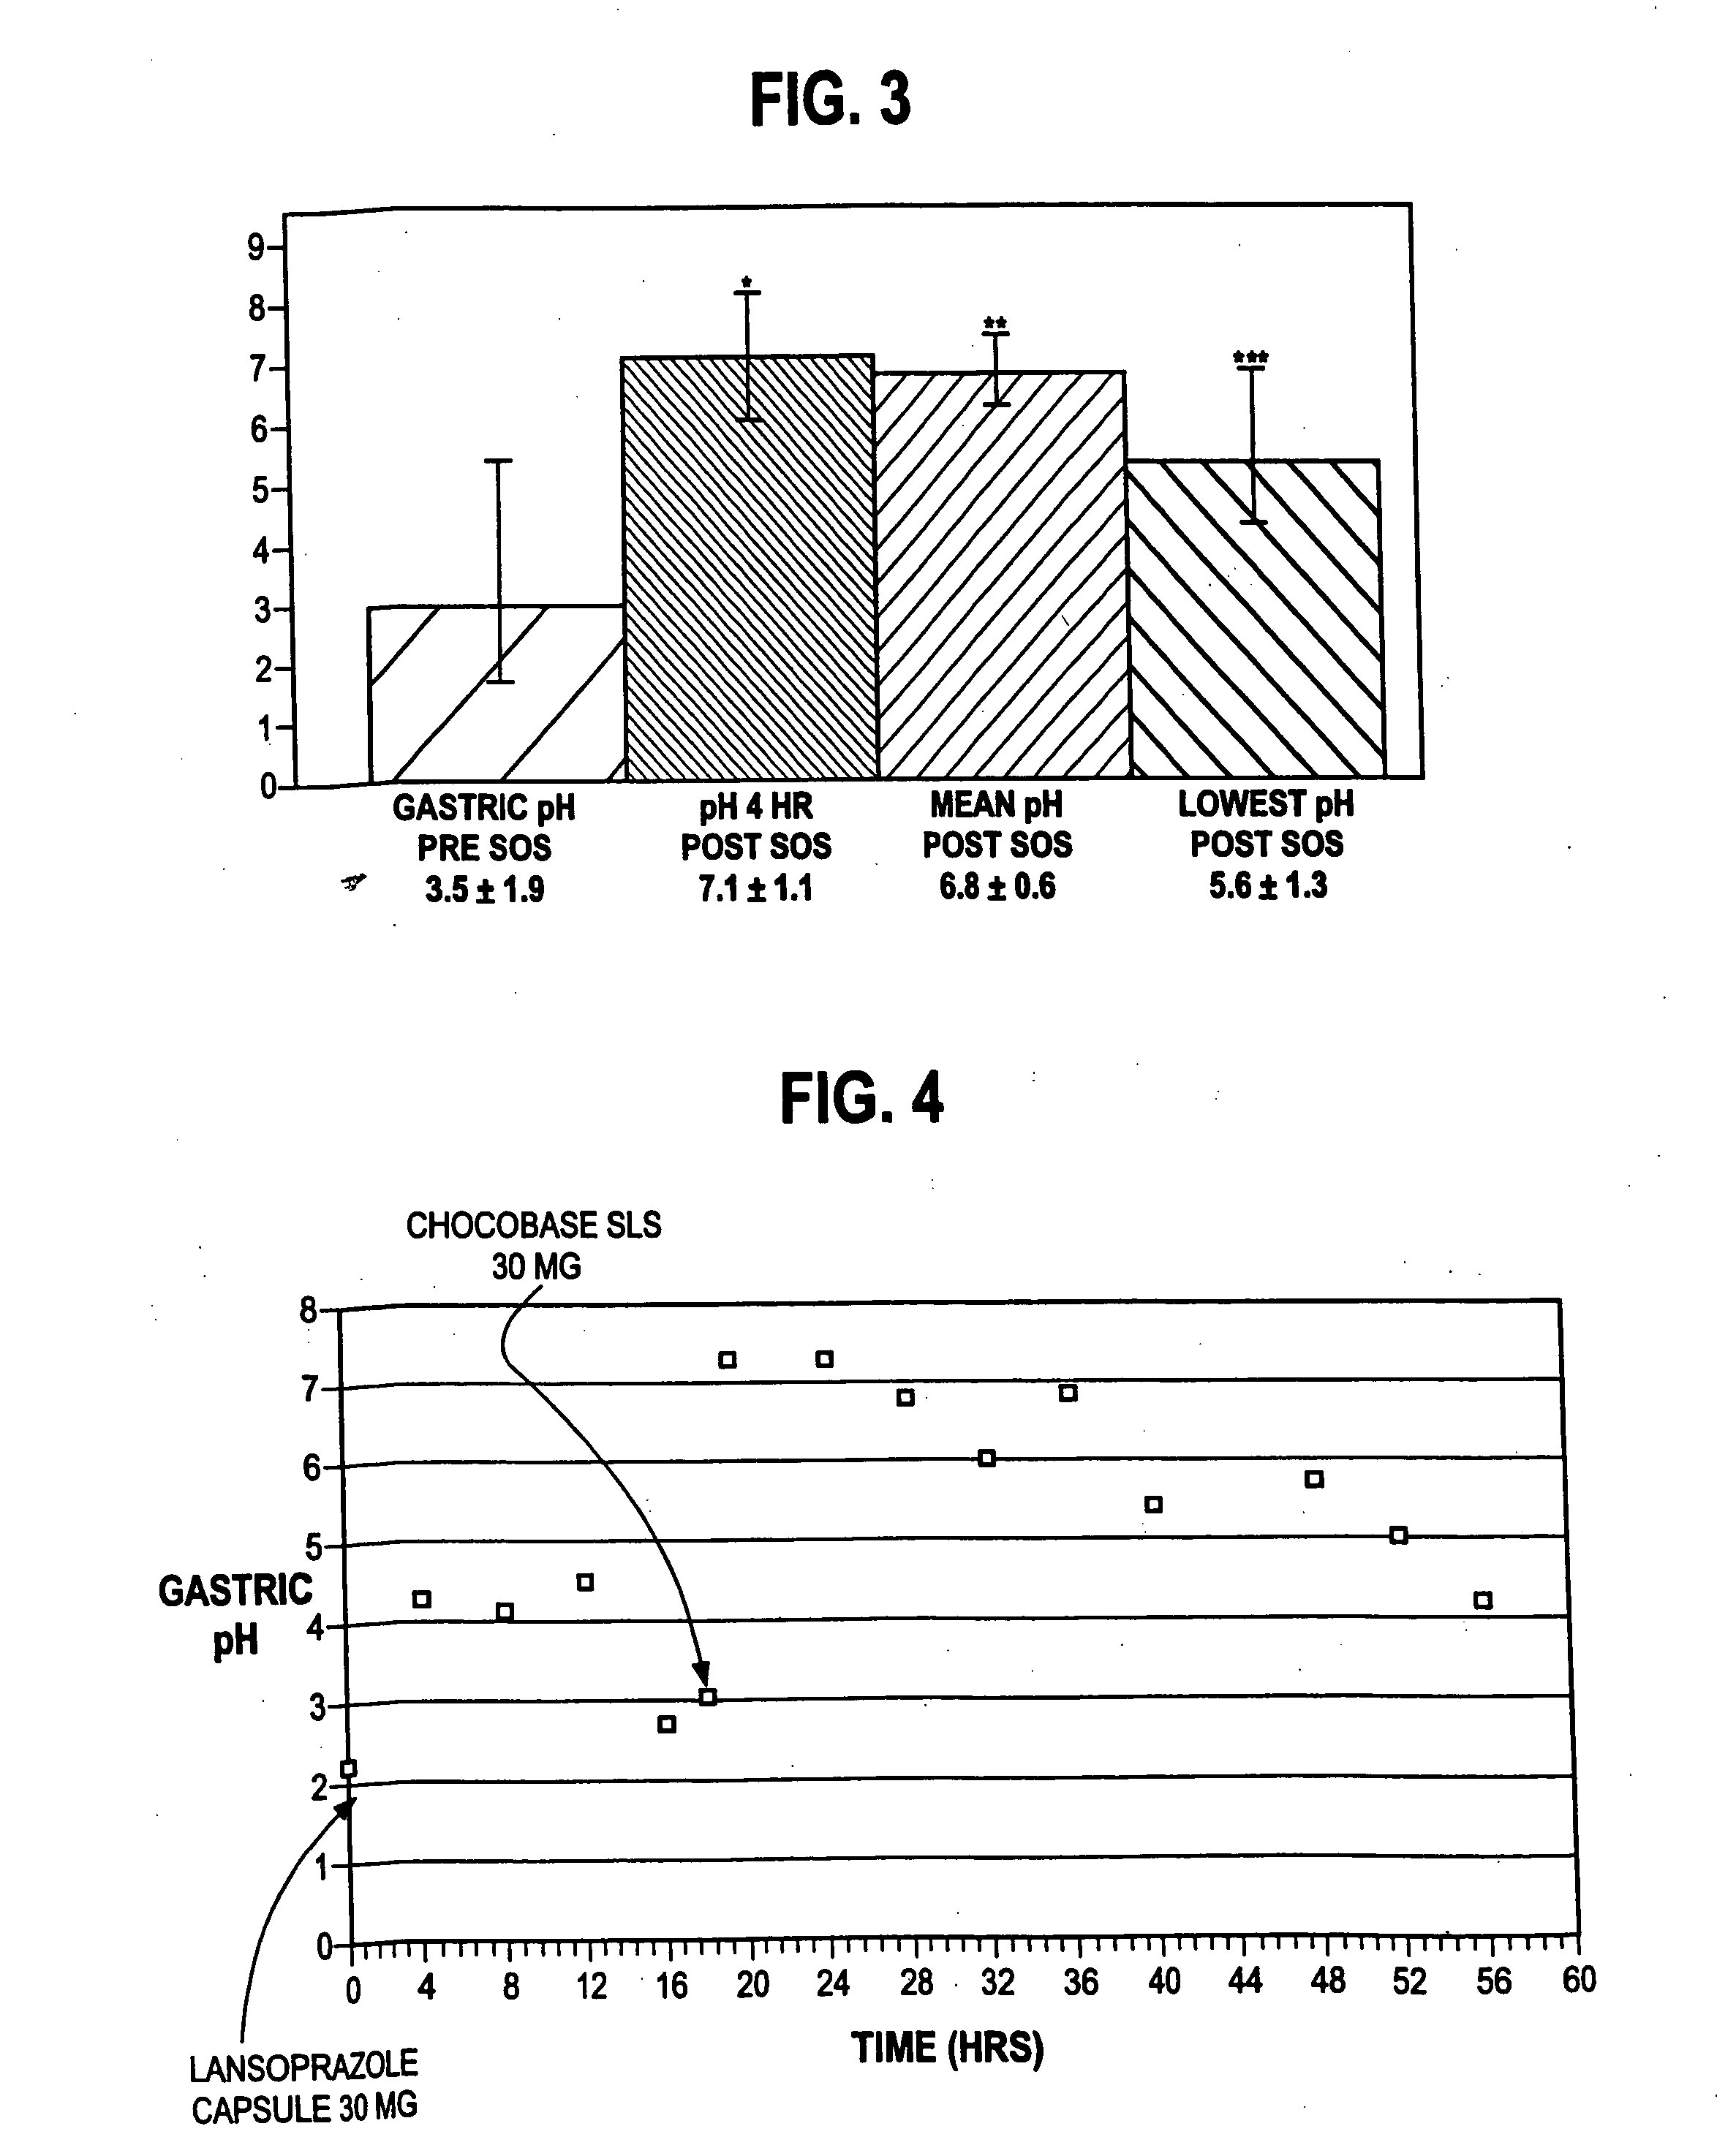 Novel substituted benzimidazole dosage forms and method of using same